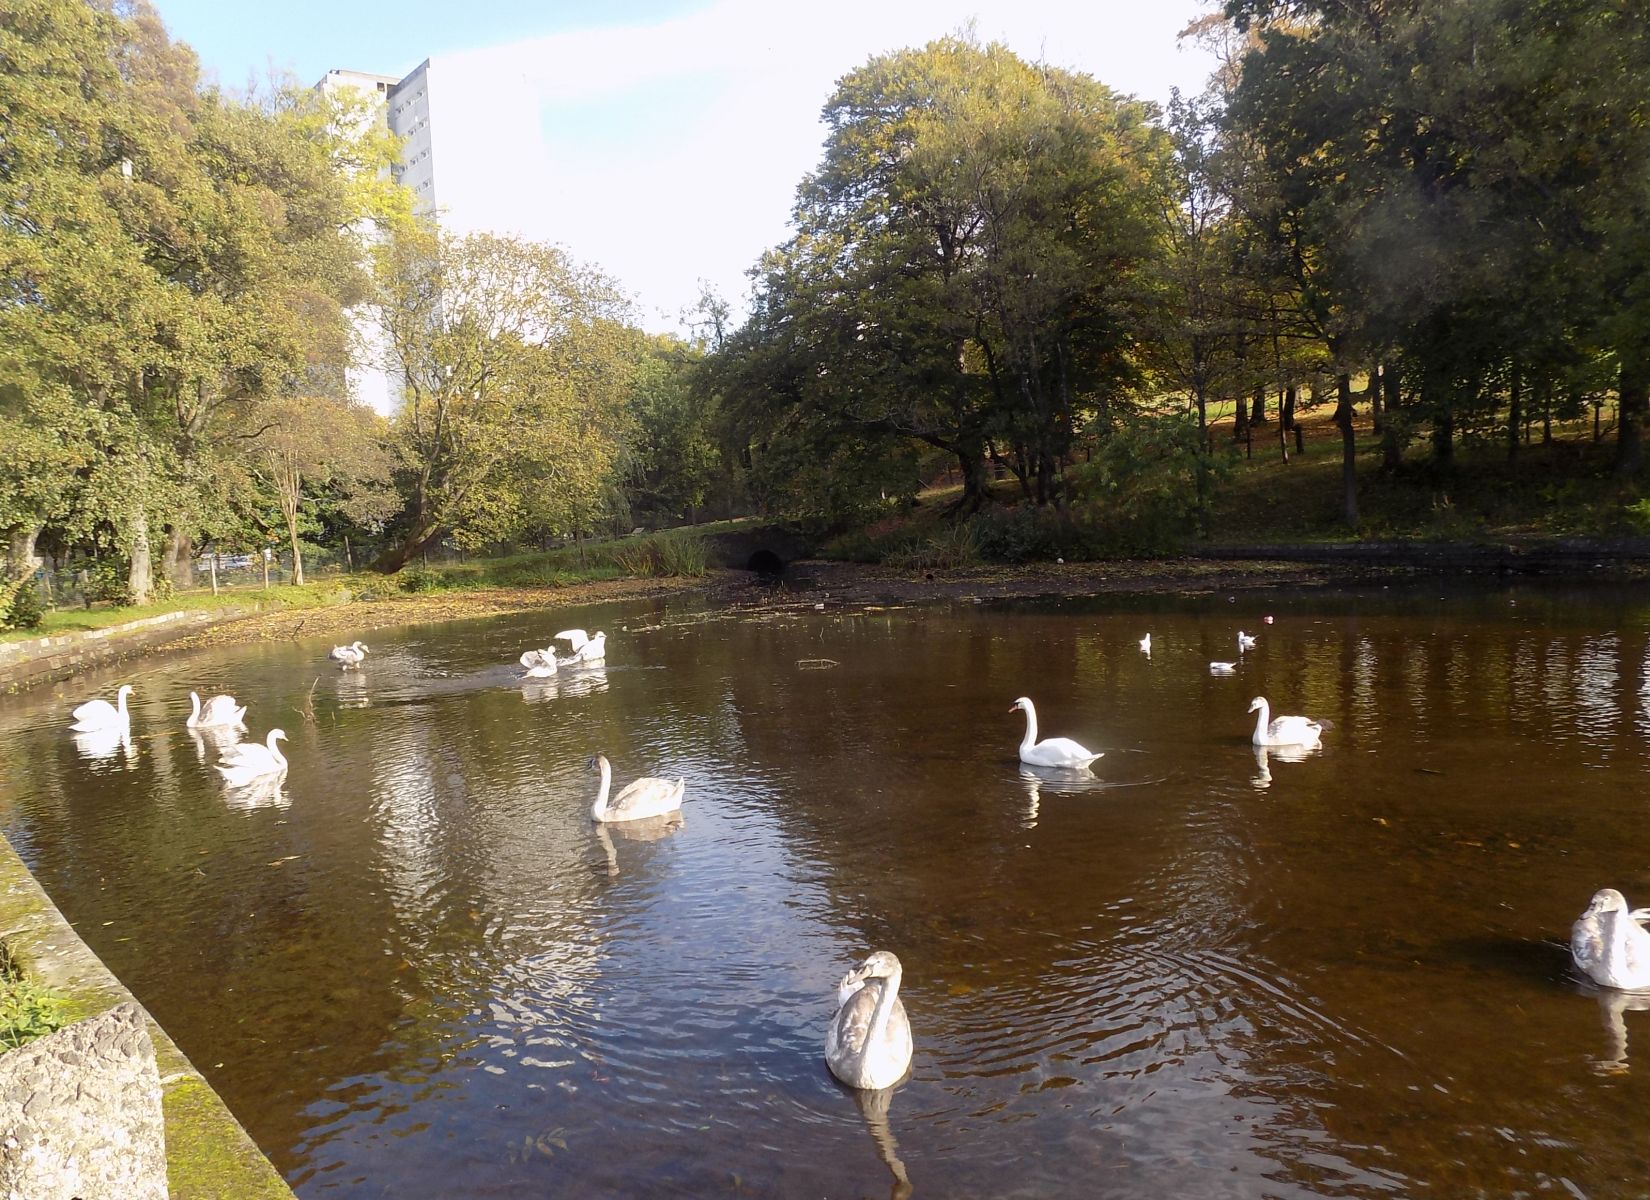 The Duck Pond in Dalmuir Park